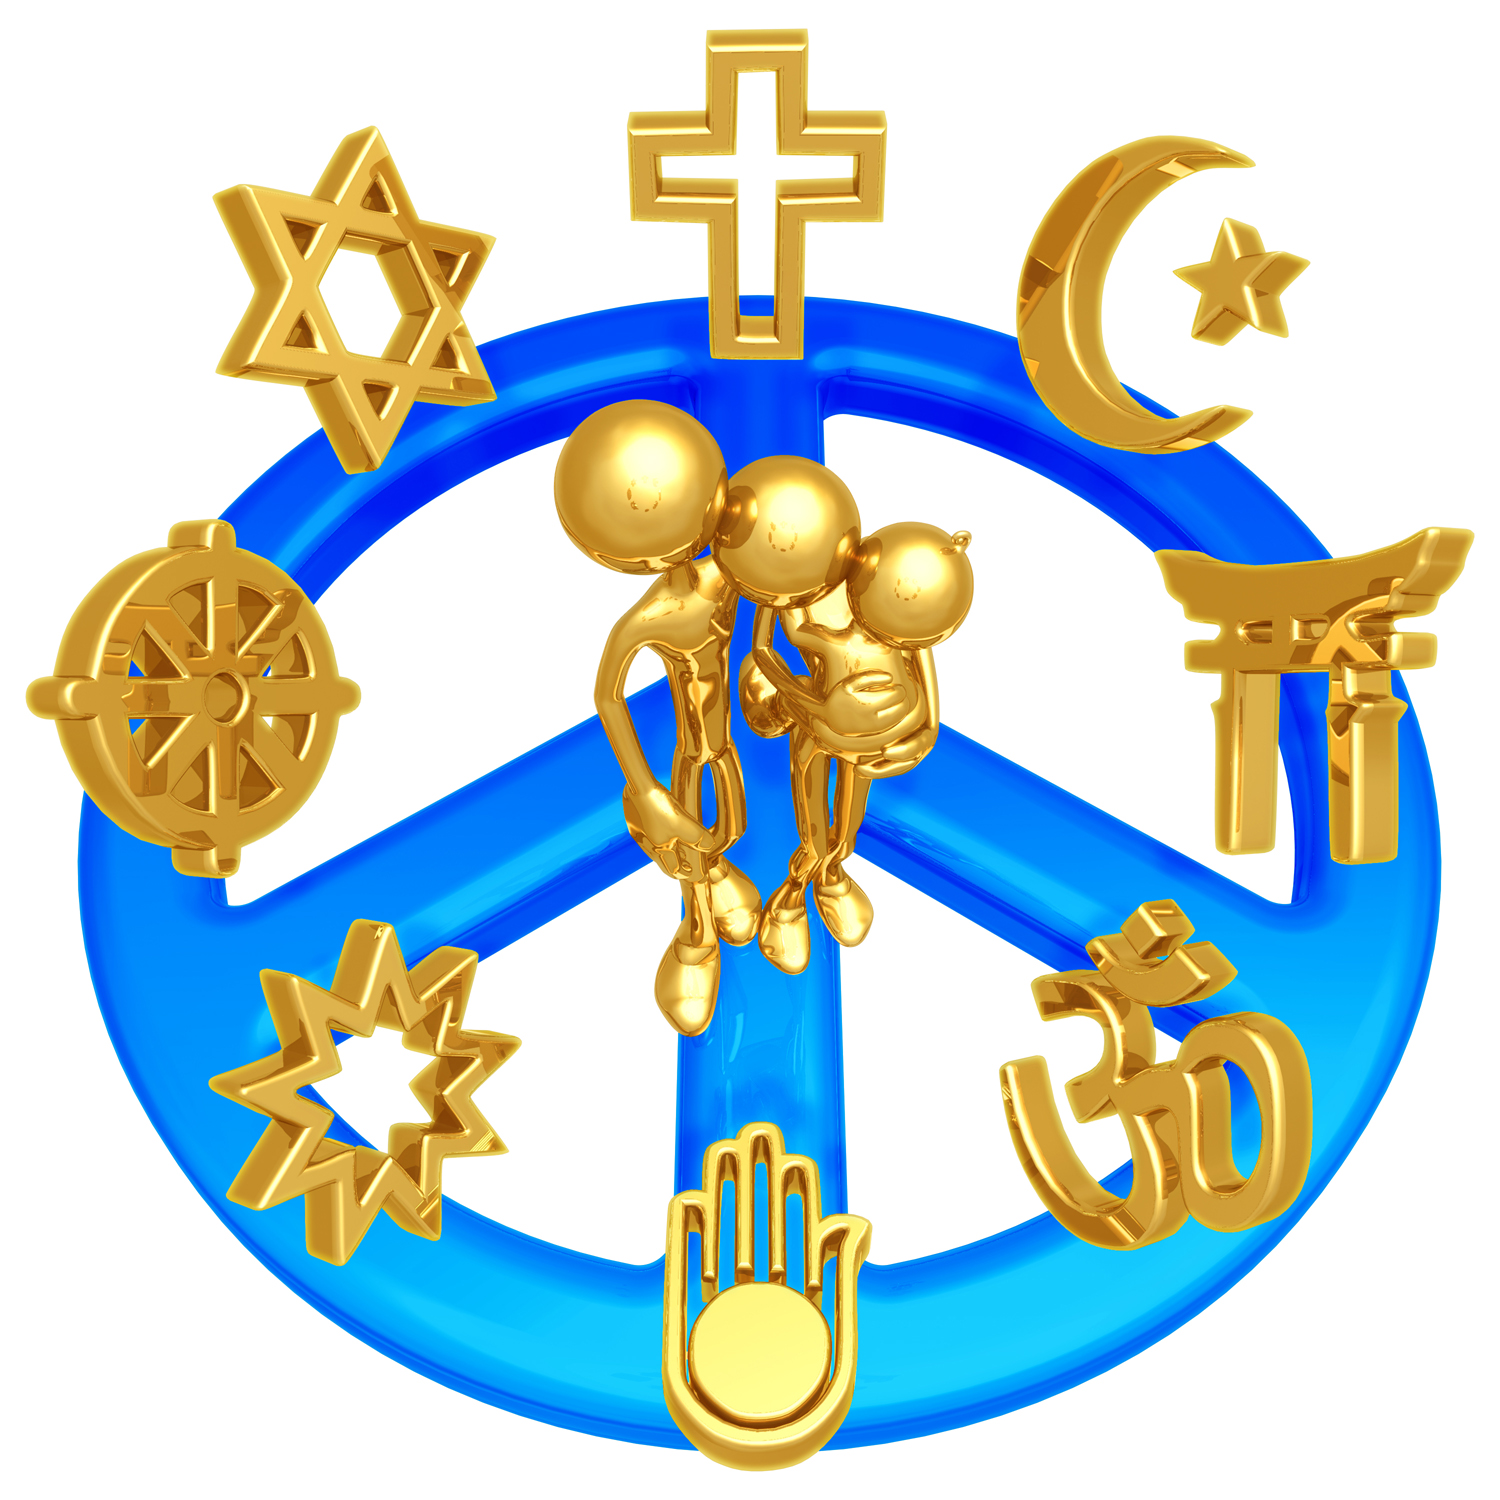 There Is 53 Freedom Of Religion Free   Free Cliparts All Used For Free    